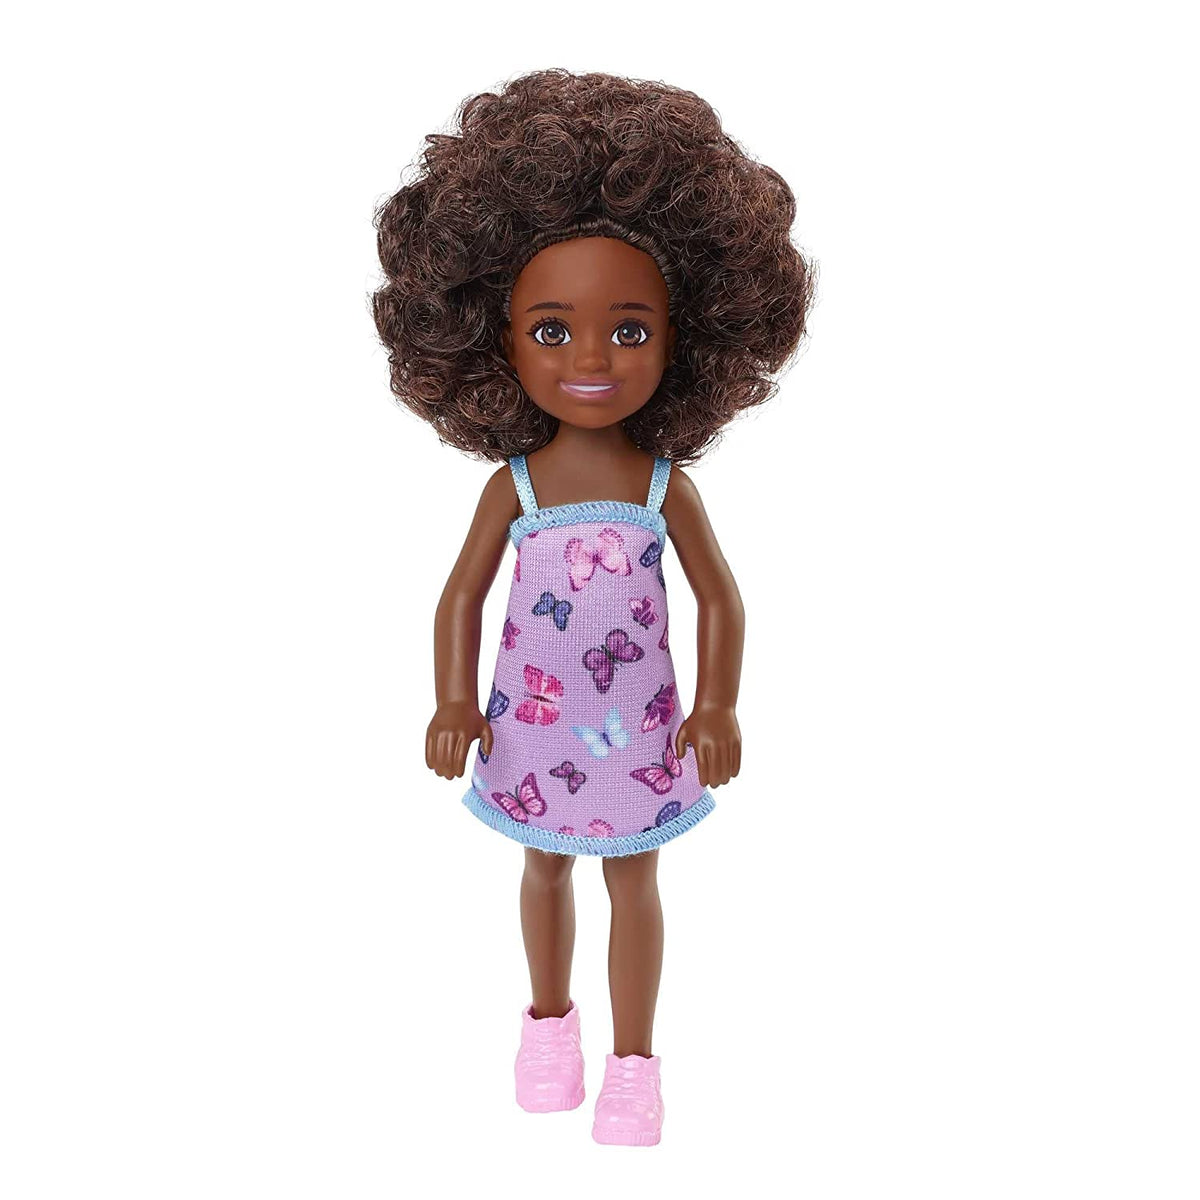 Barbie Chelsea 6 Inch Doll Curly Brunette Hair Wearing Butterfly-Print Dress and Pink Shoes for Kids Ages 3 Years Old & Up